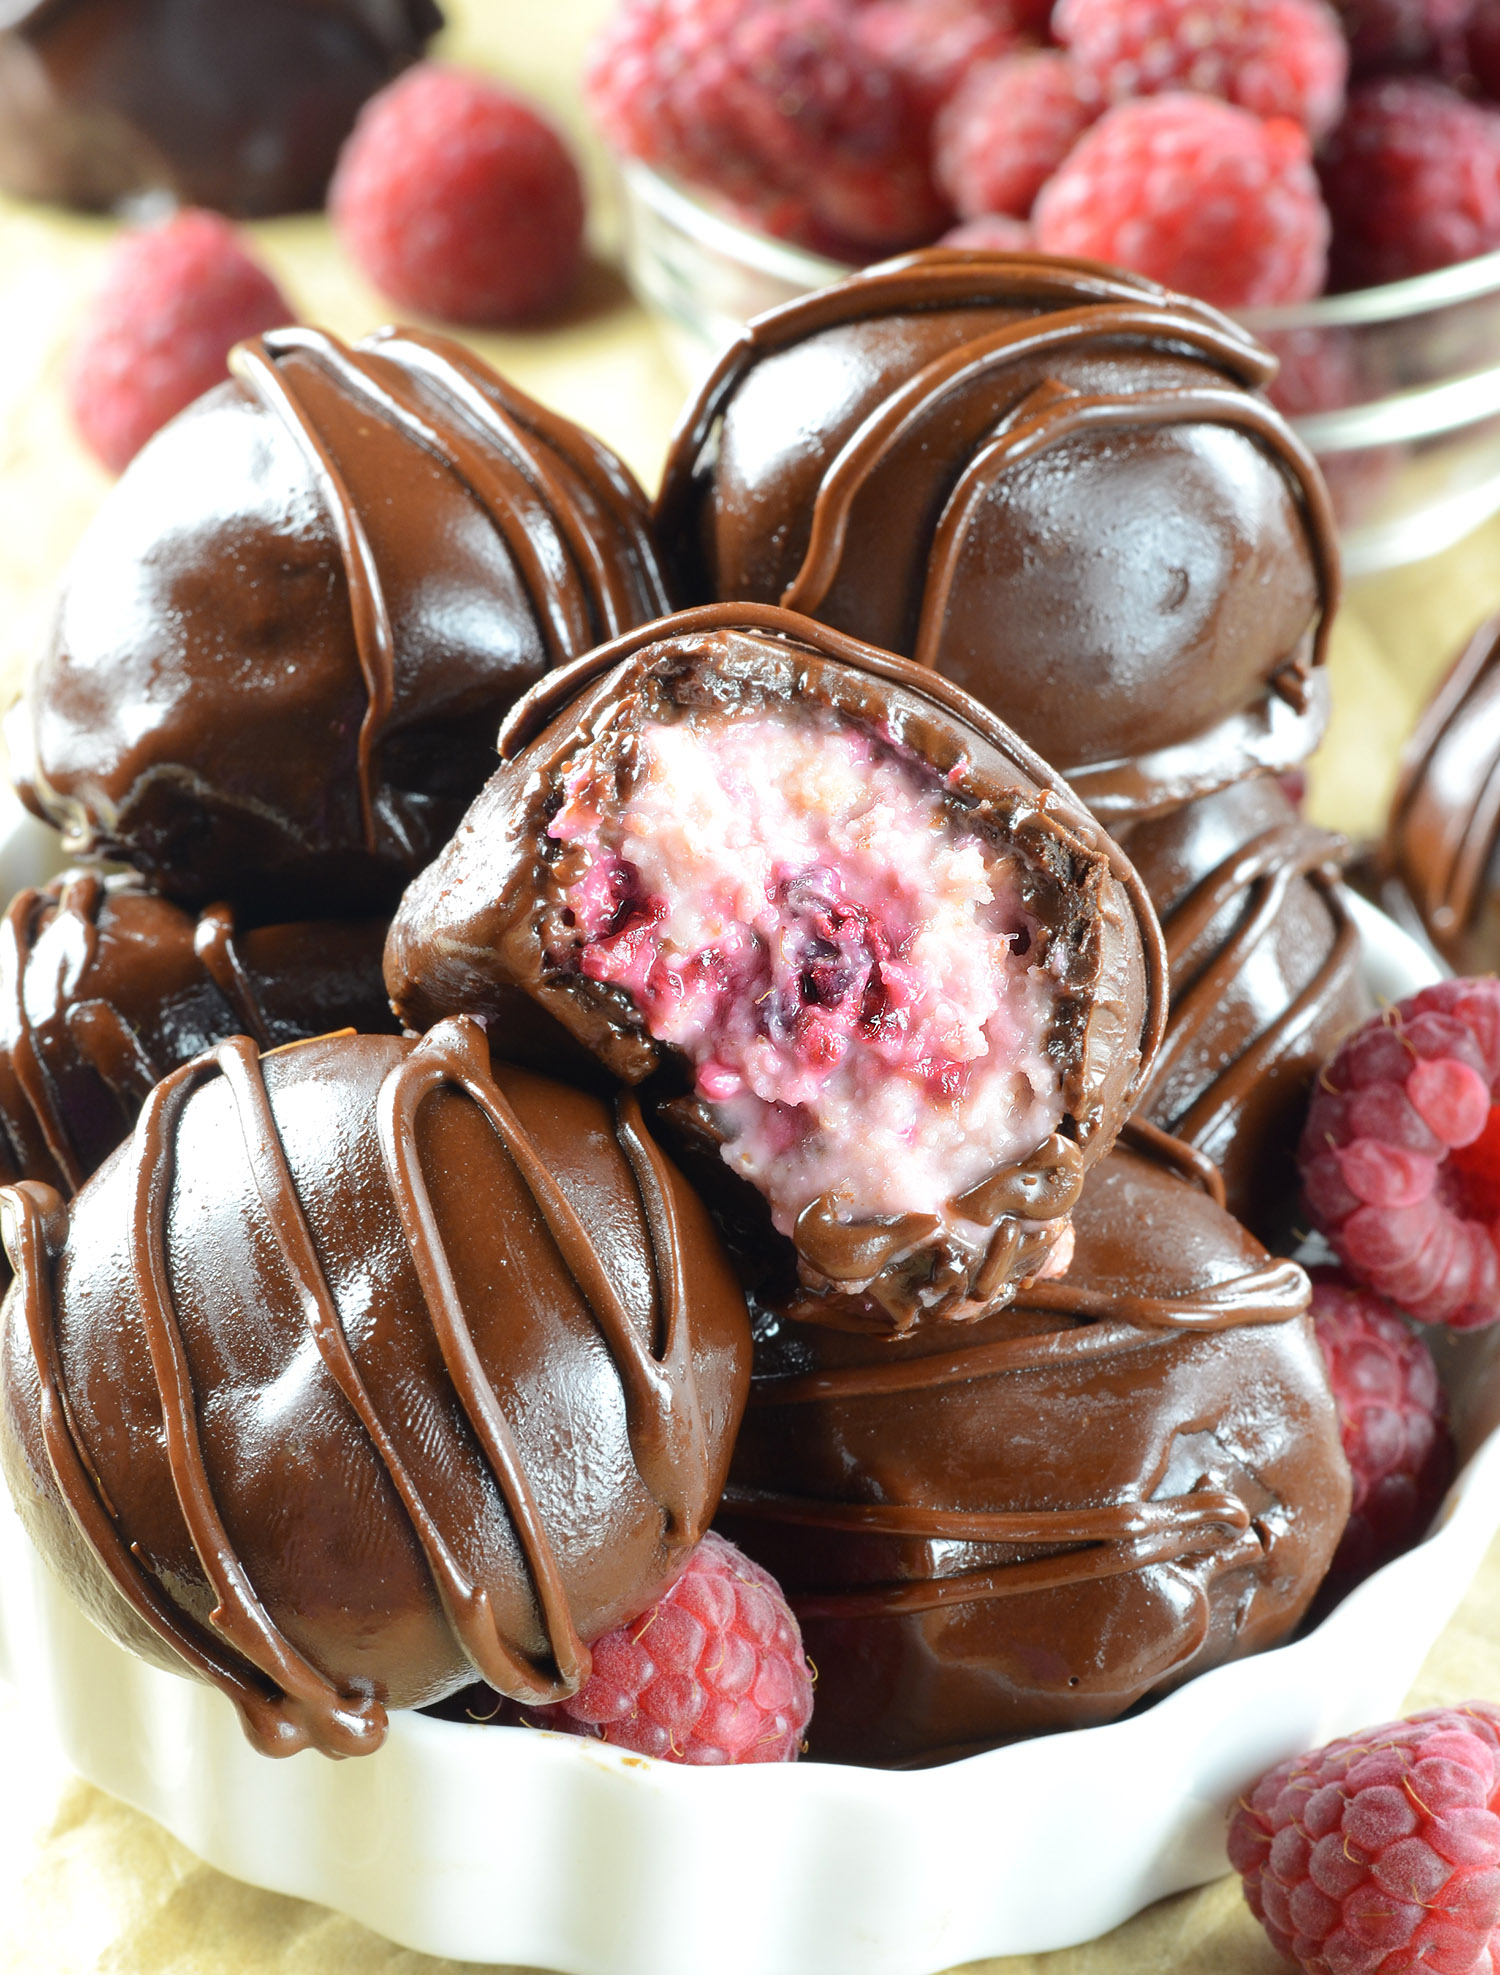 Decadent raspberry truffles coated in dark chocolate with a rich raspberry filling, drizzled with melted chocolate, presented in a white bowl with fresh raspberries in the background.